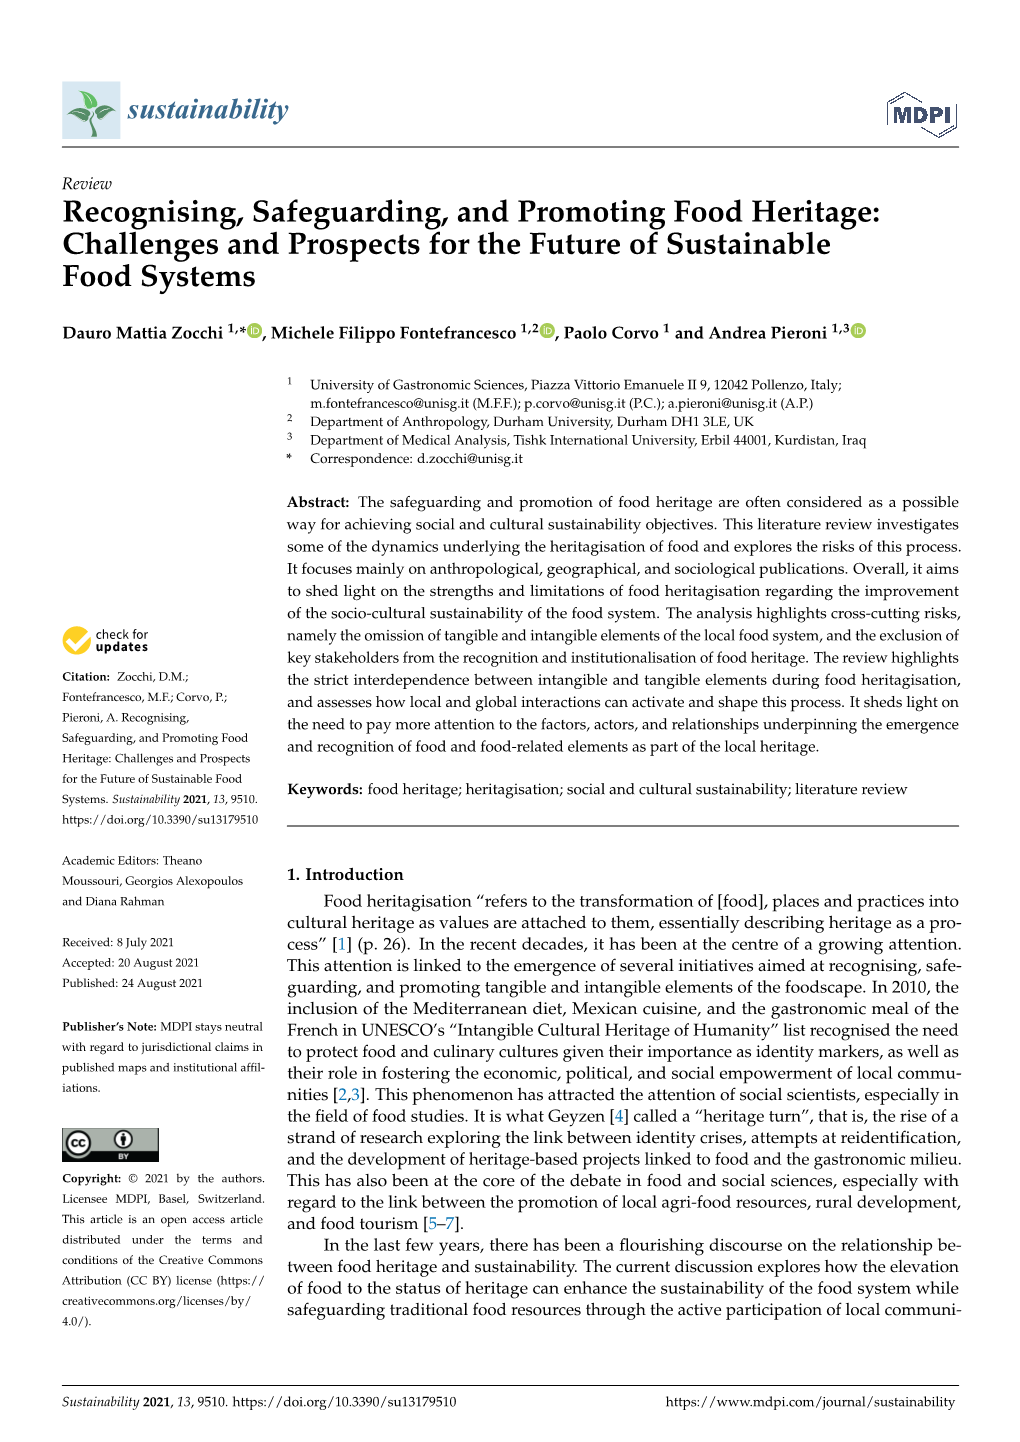 Recognising, Safeguarding and Promoting Food Heritage: Challenges and Prospects for the Future of Sustainable Food Systems